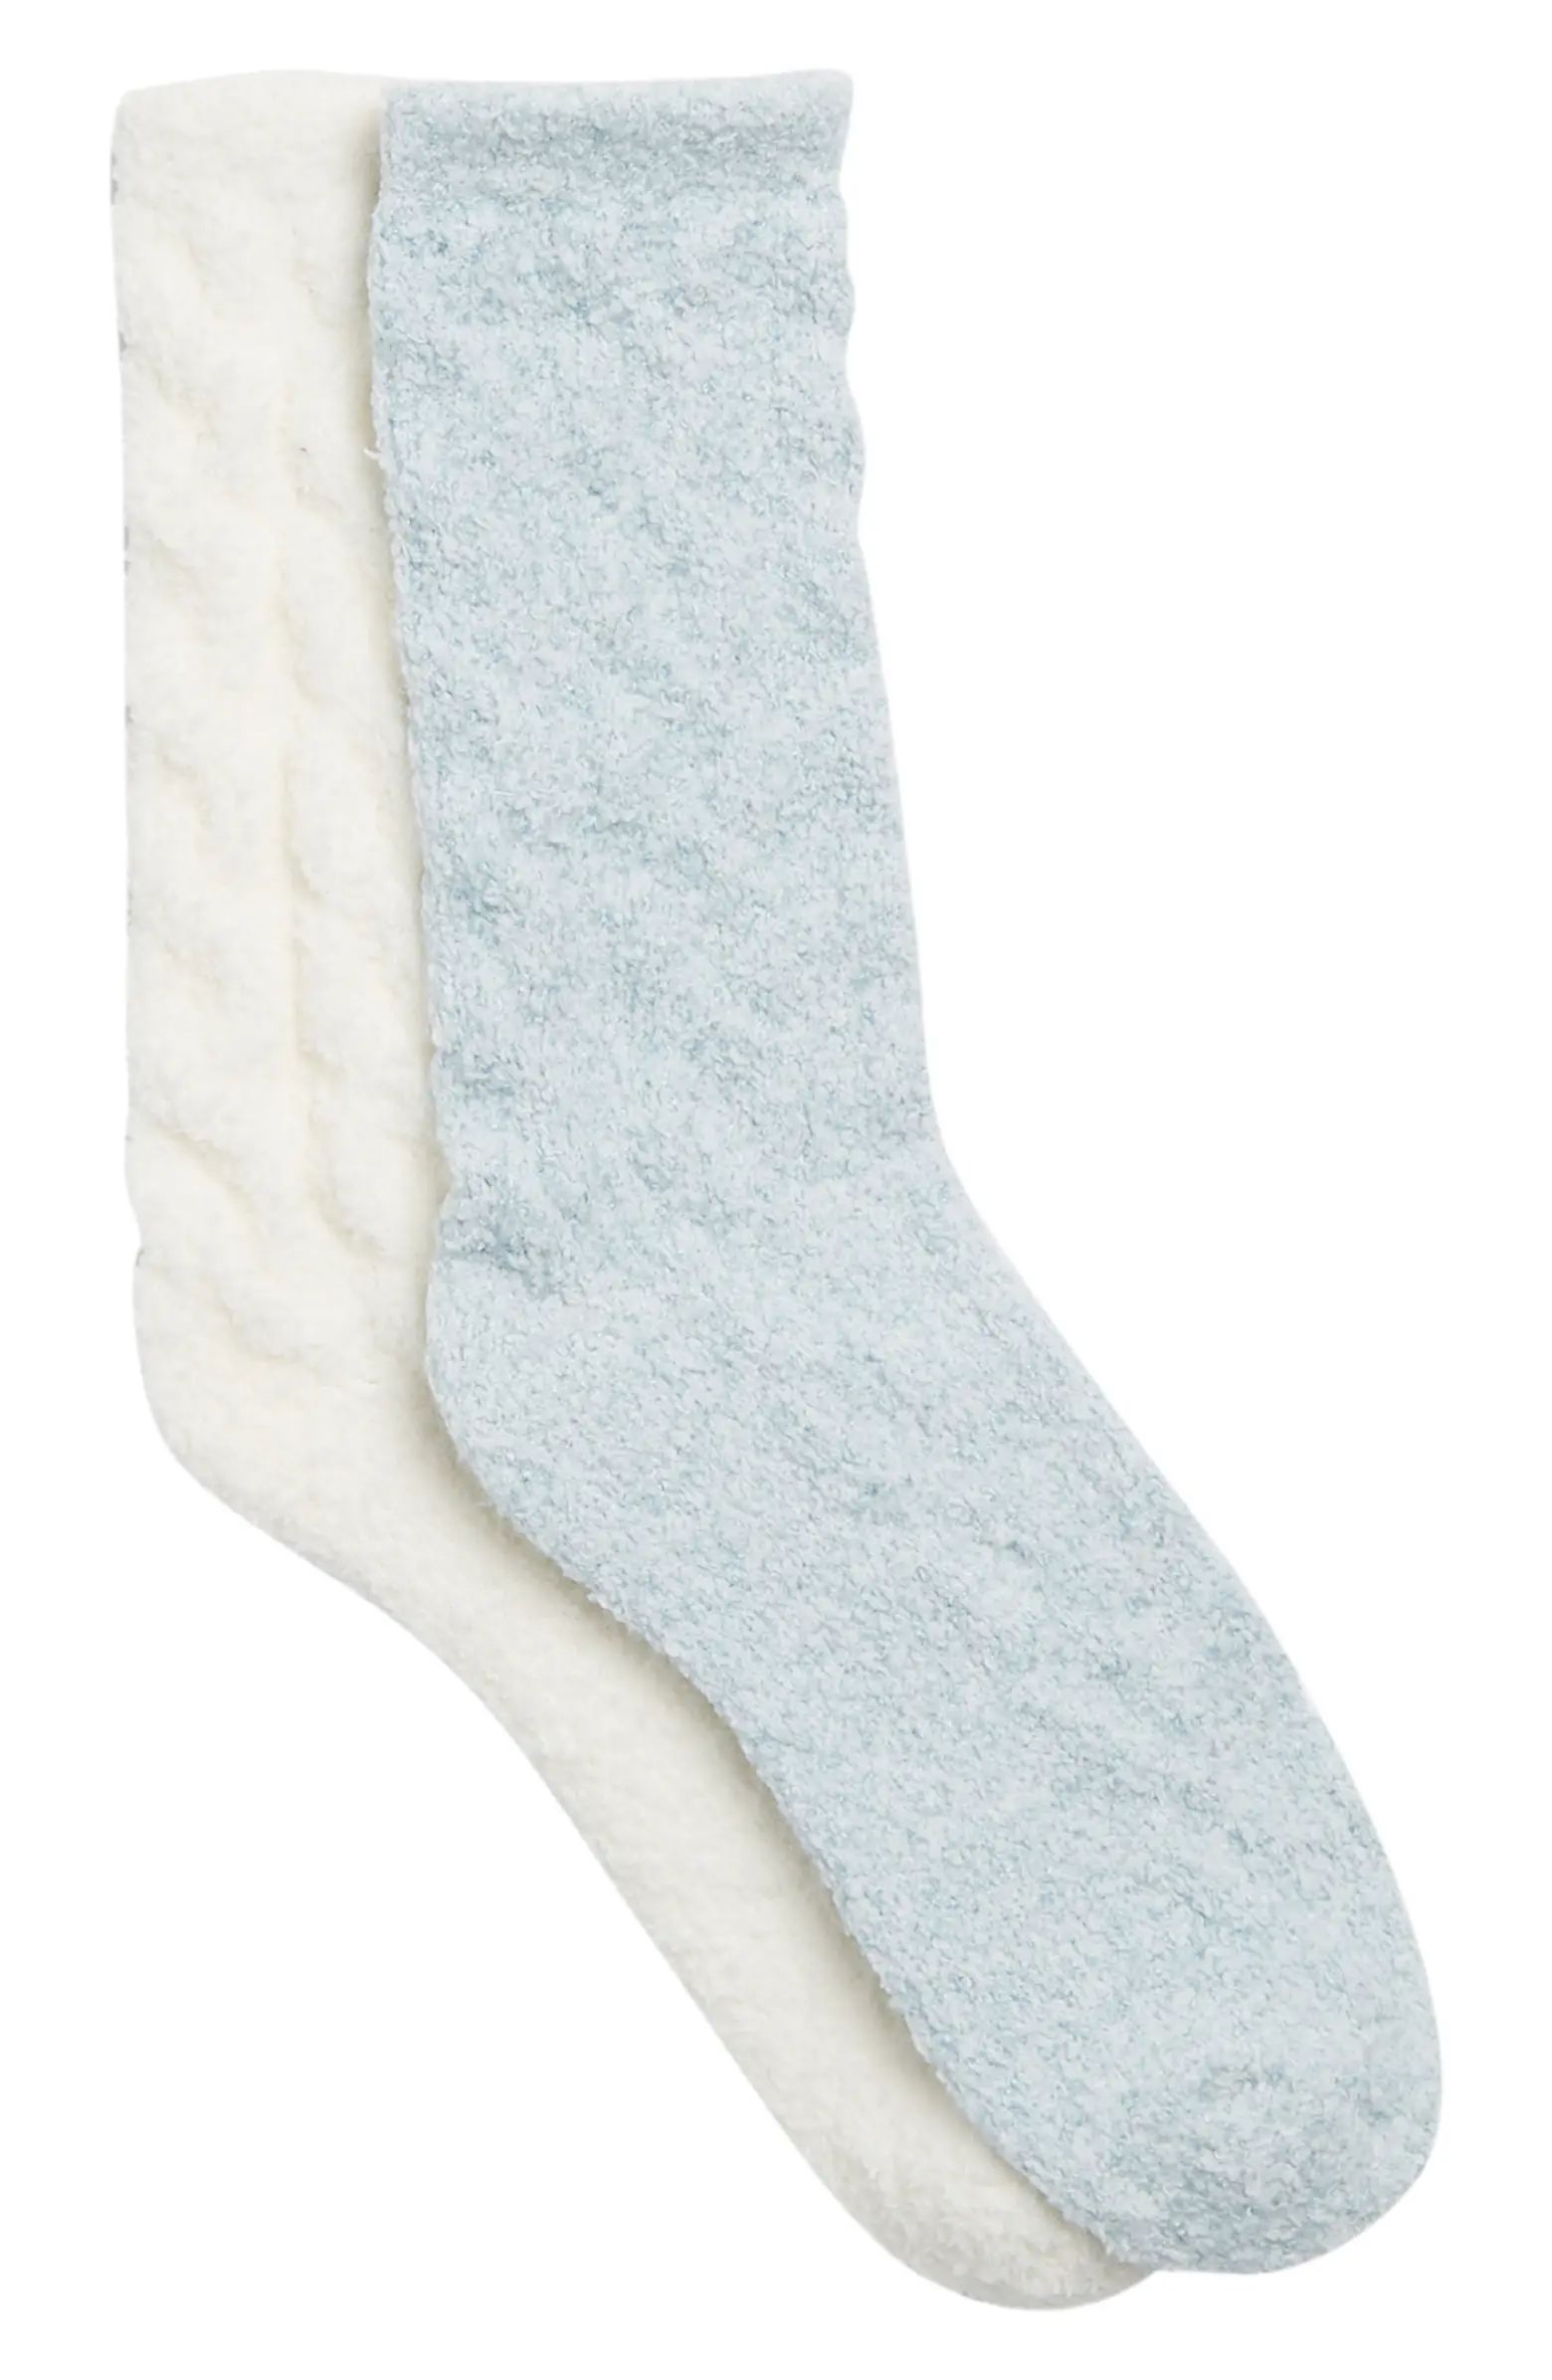 Butter Cable Knit Crew Socks - Pack of 2 | Nordstrom Rack